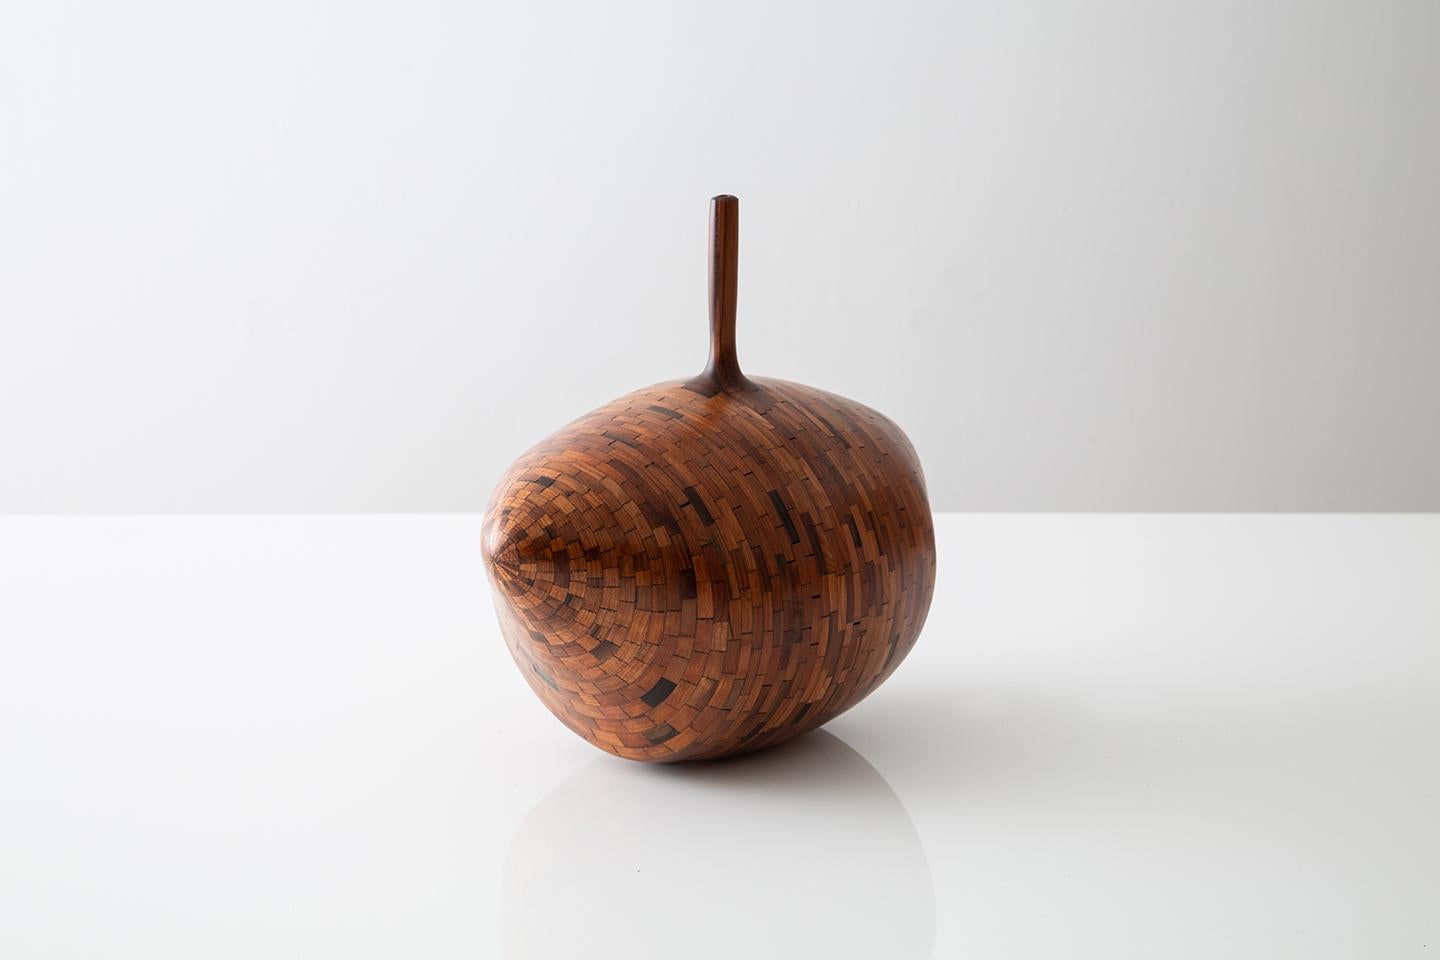 Part of Richard Haining's STACKED Collection, this vase was made using reclaimed California redwood salvaged from a decommissioned NYC water tower. The wood's natural coloring shows off tones ranging from pink and deep reds to almost black in color.